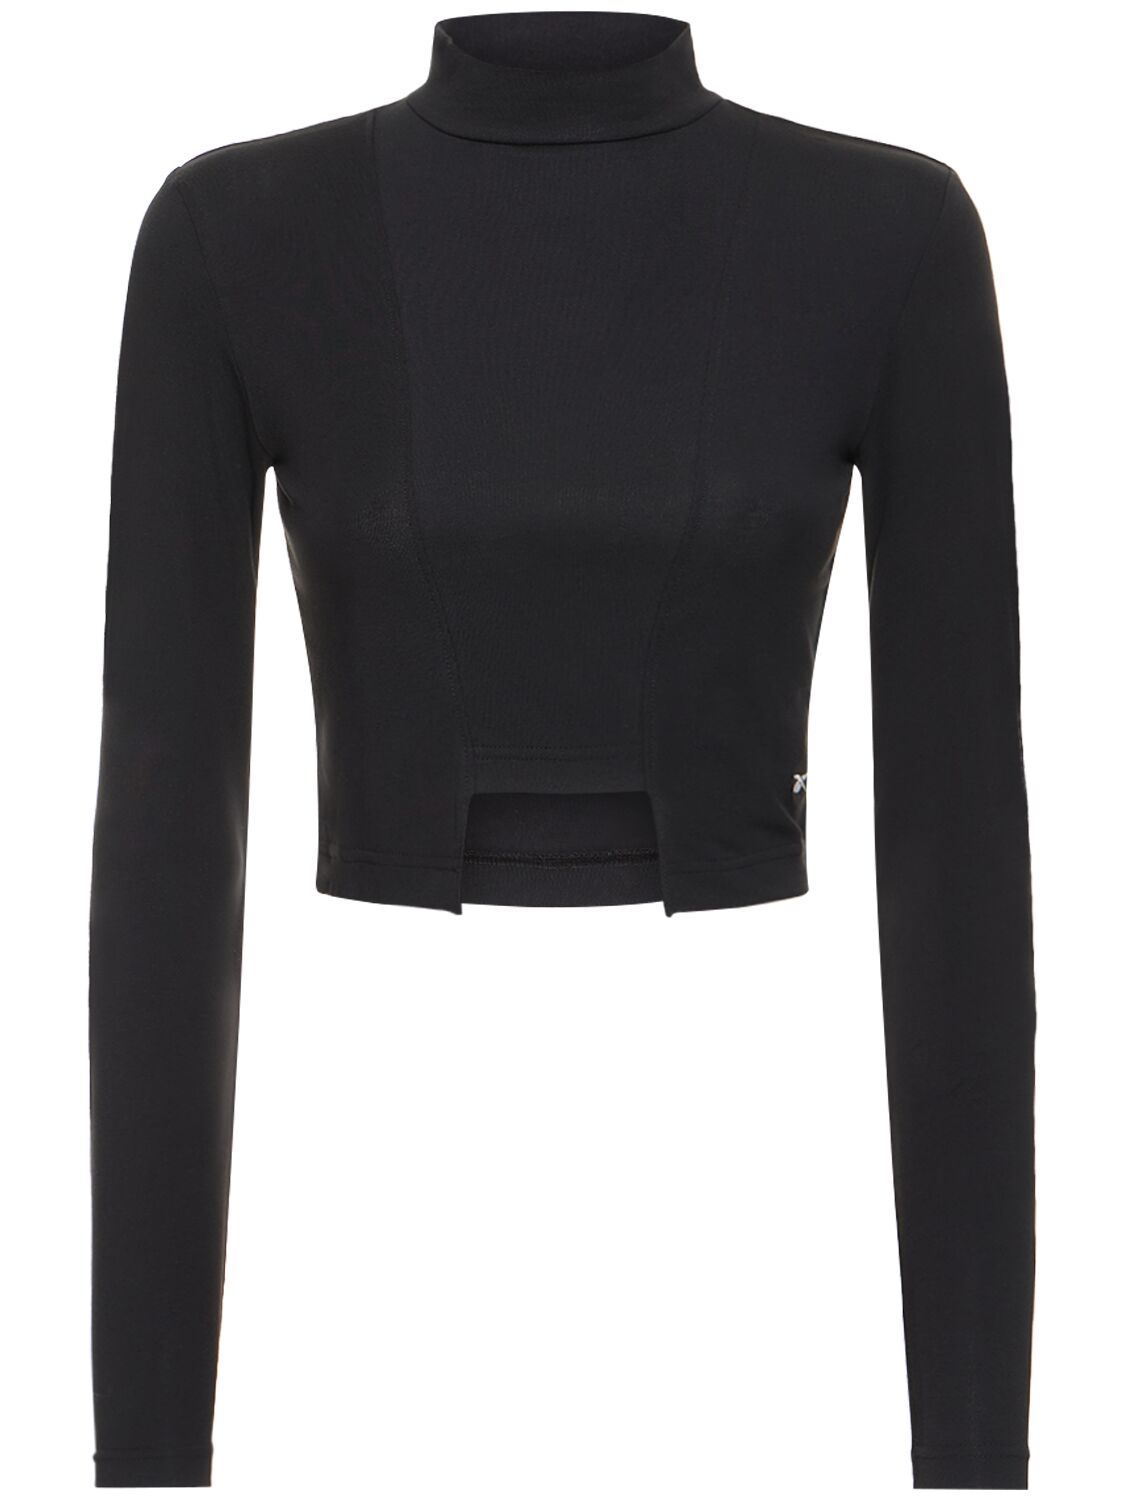 Image of Classic Cotton Mock Neck Long Sleeve Top